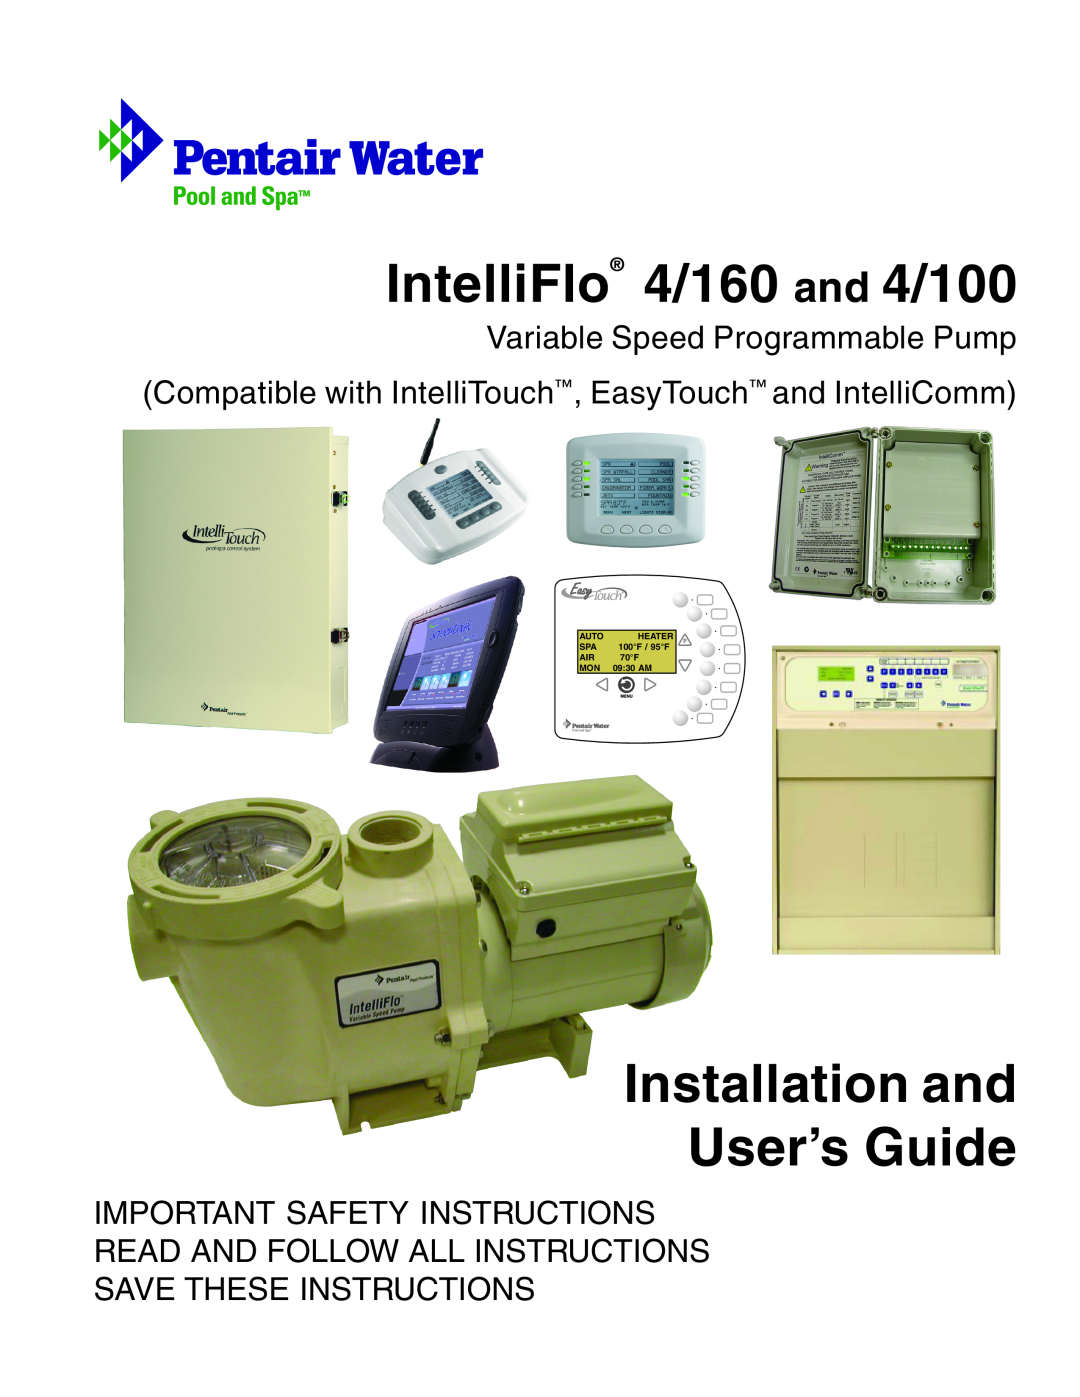 Pentair important safety instructions IntelliFlo 4/160 and 4/100, Installation and User’s Guide 